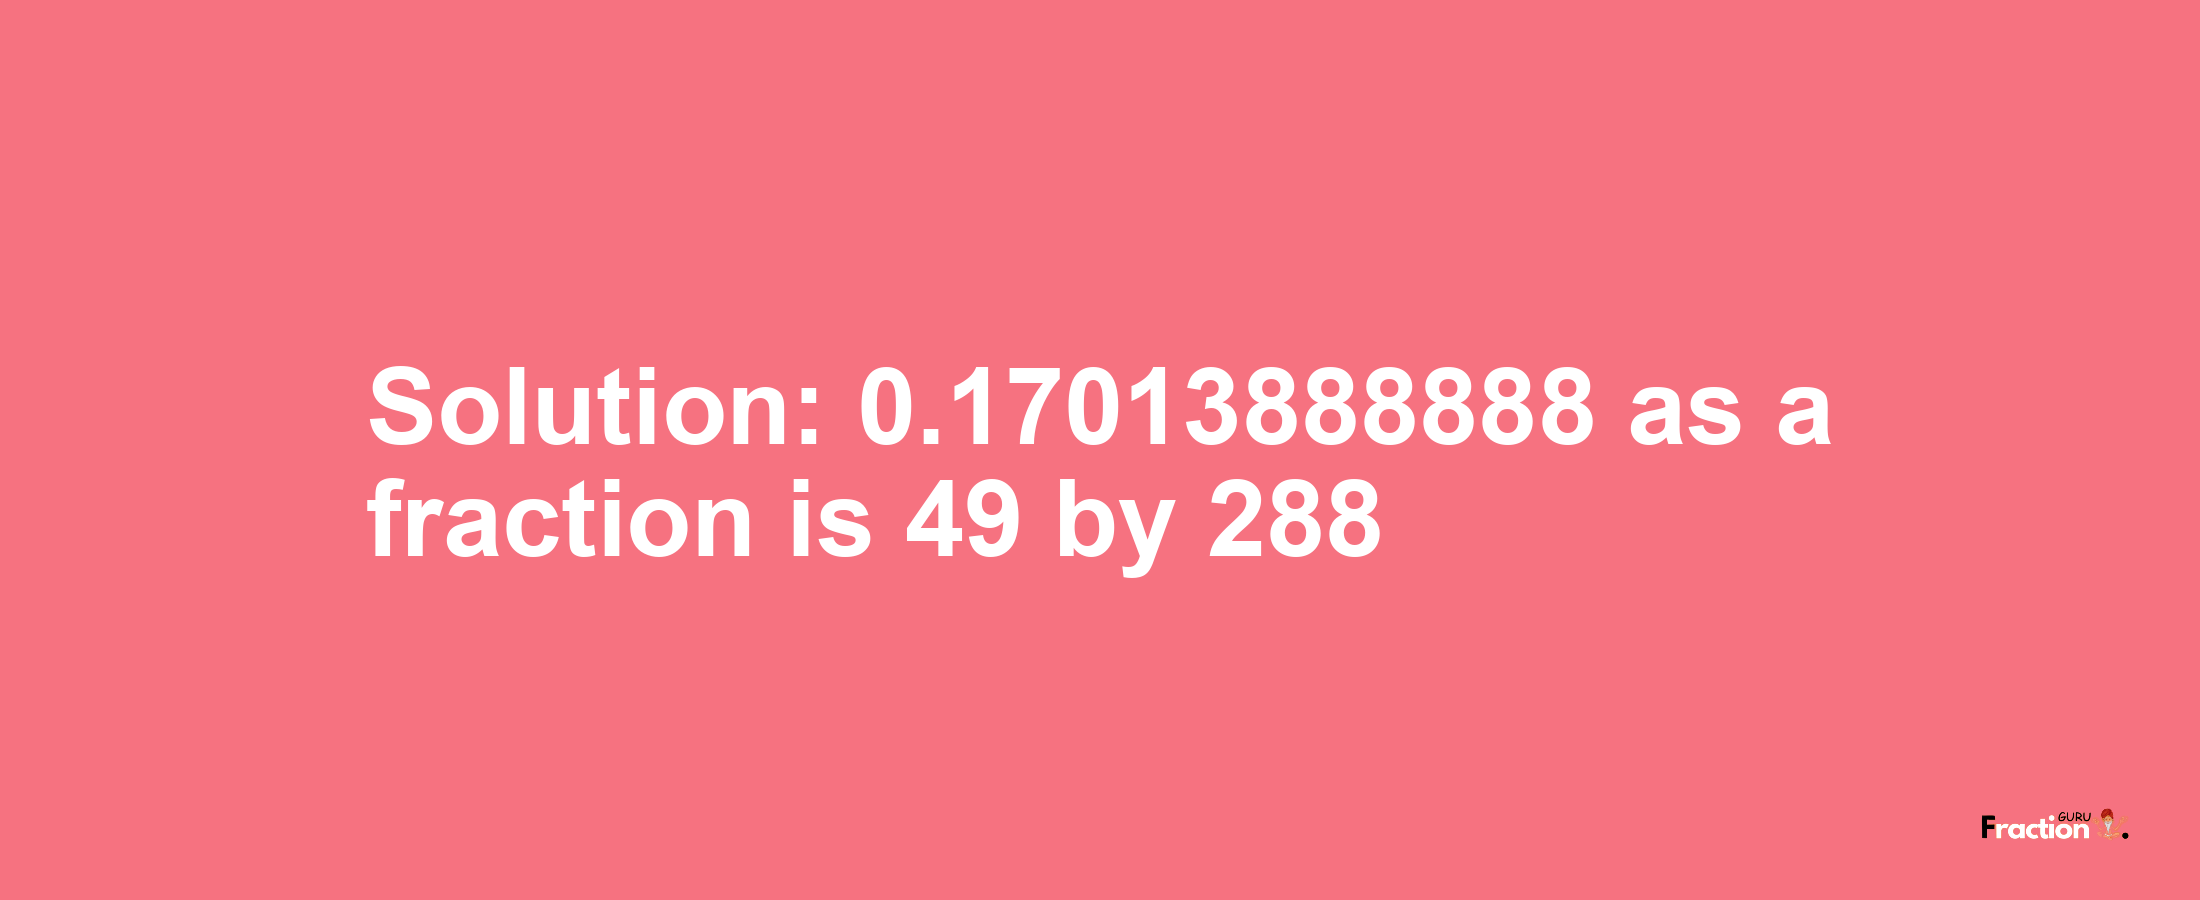 Solution:0.17013888888 as a fraction is 49/288